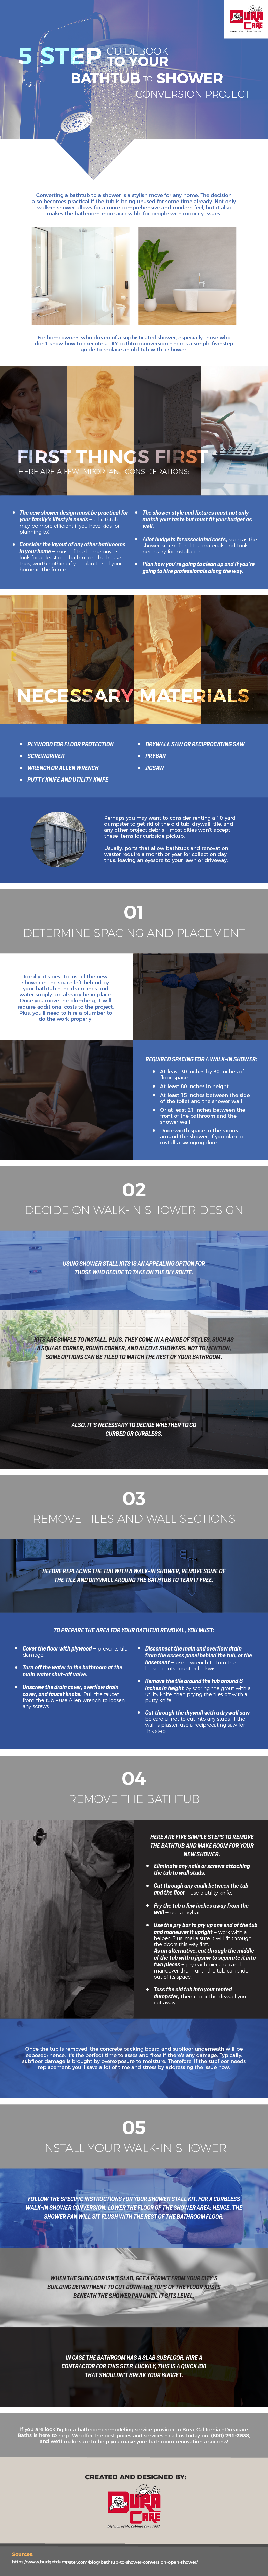 5 Step Guidebook to Your Bathtub to Shower Conversion Project-01 infographic